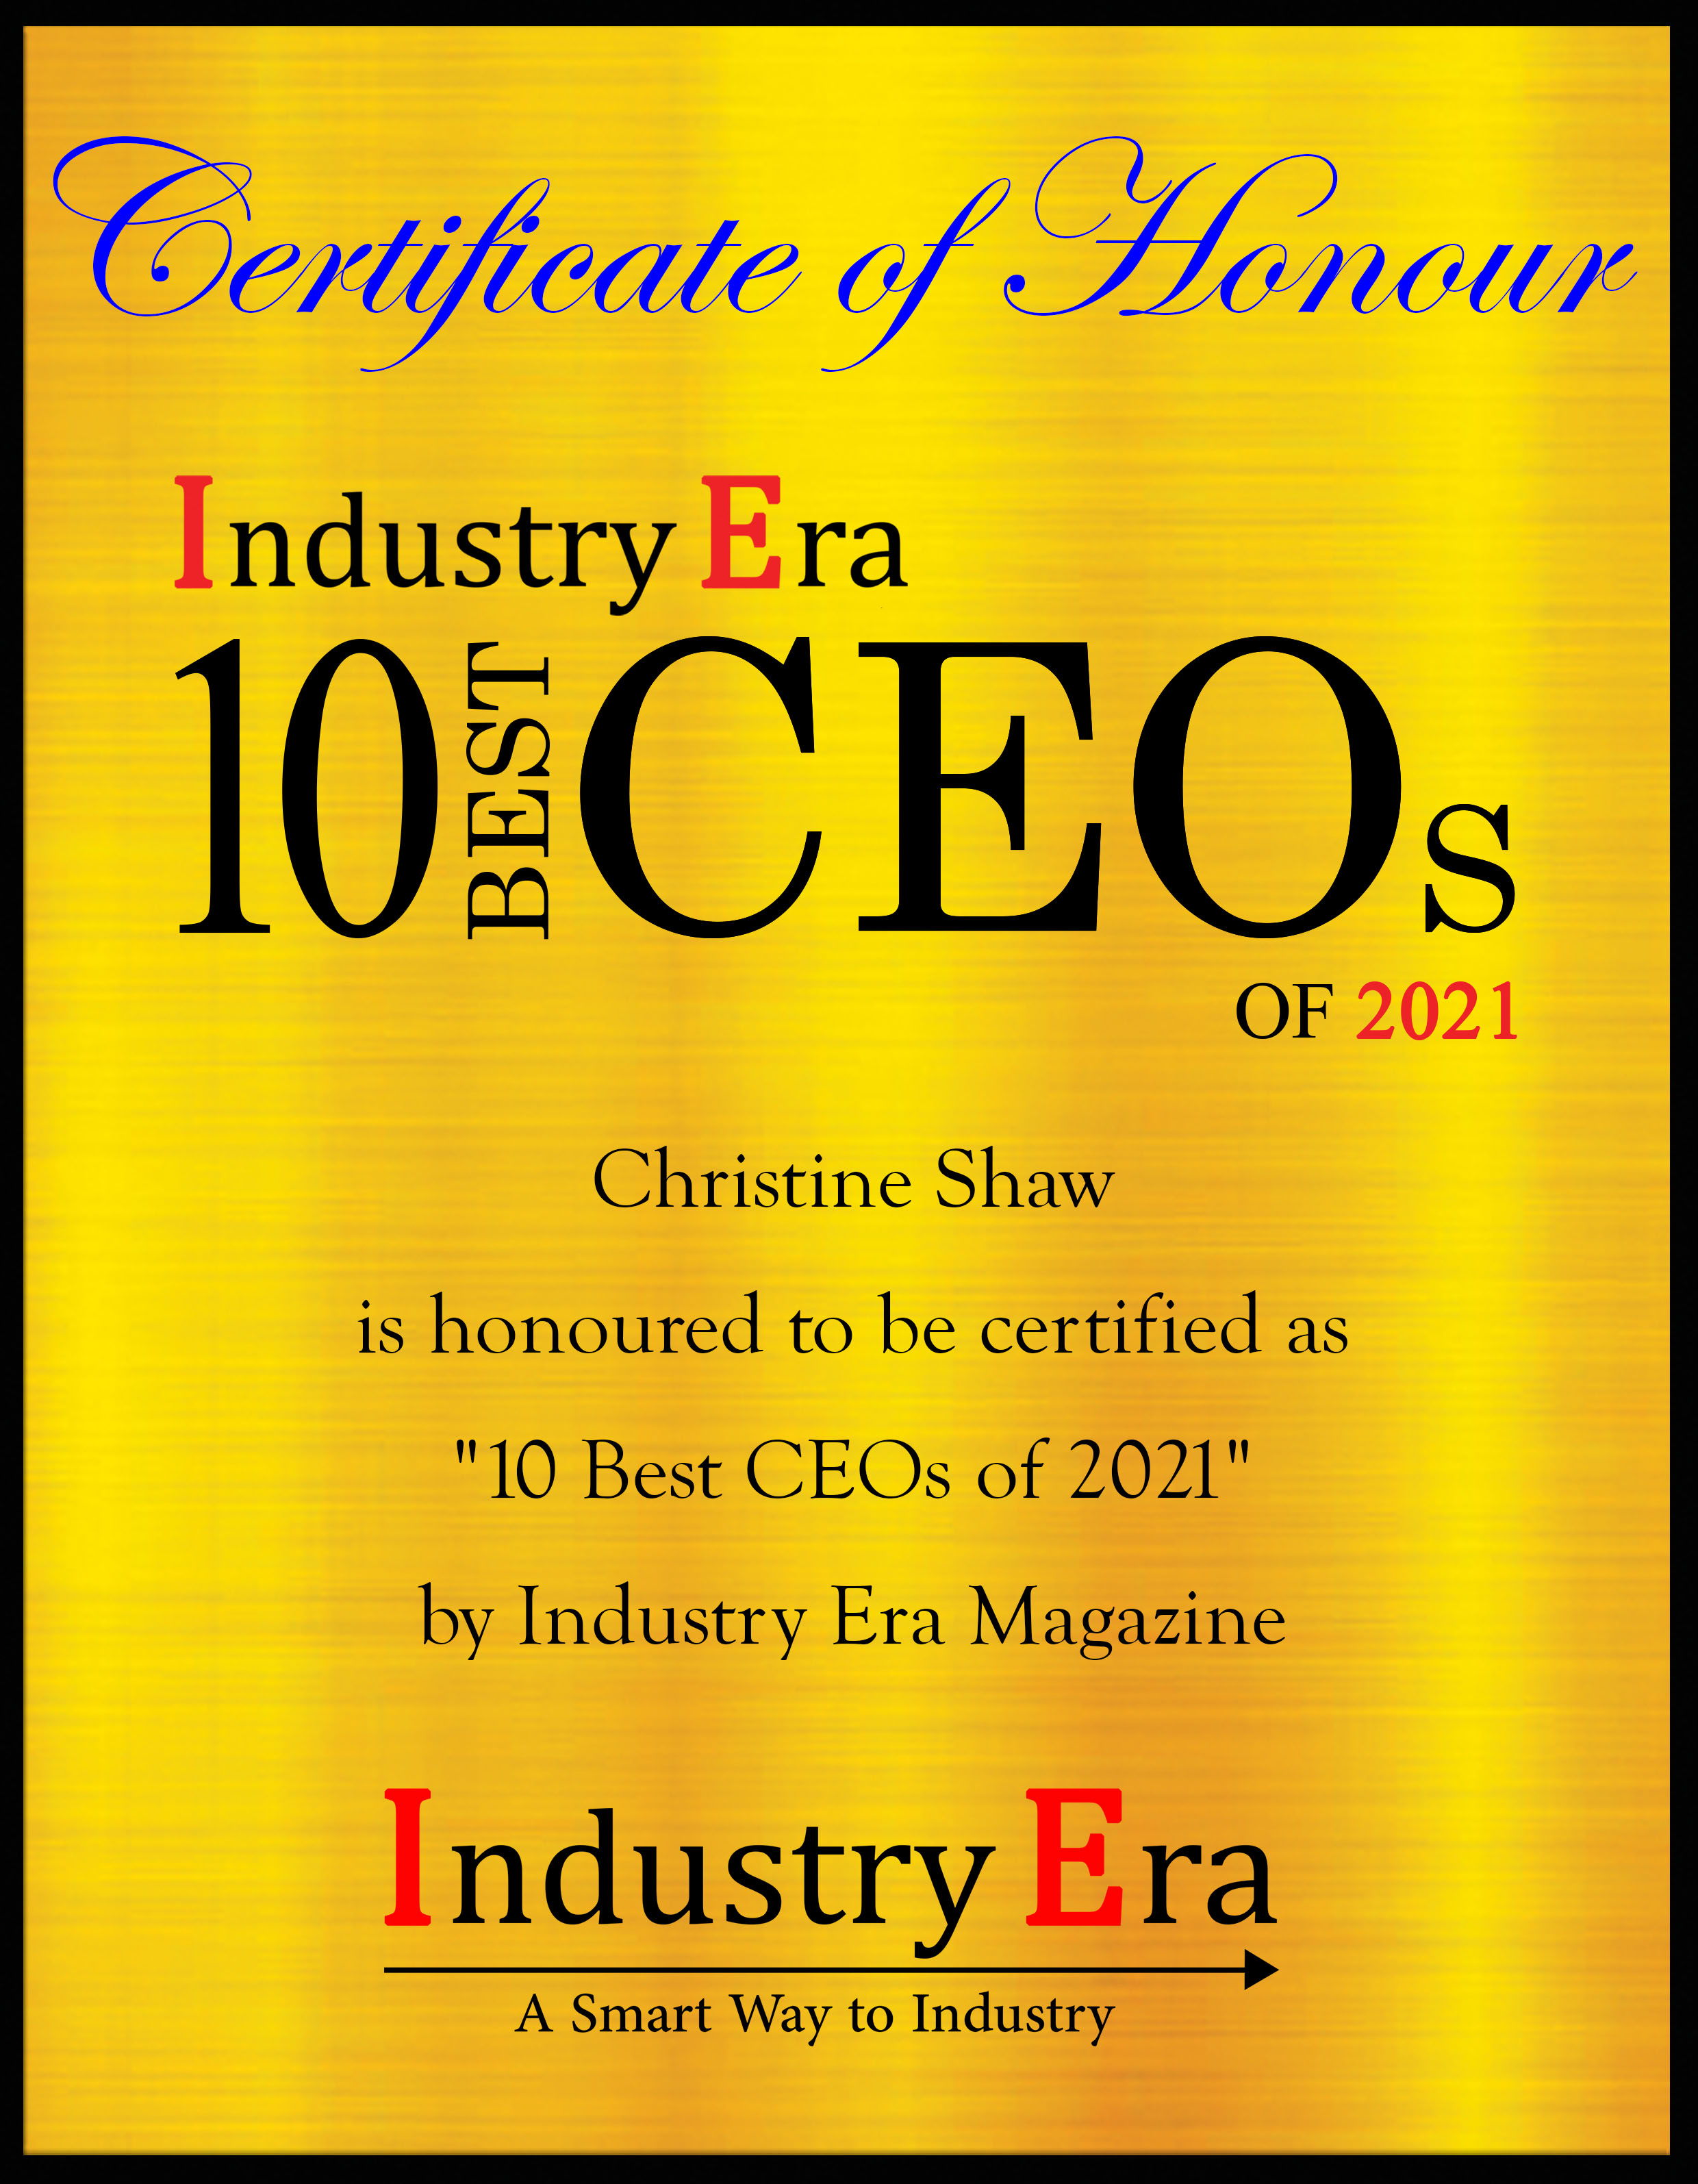 Christine Shaw CEO of InvestmentNews